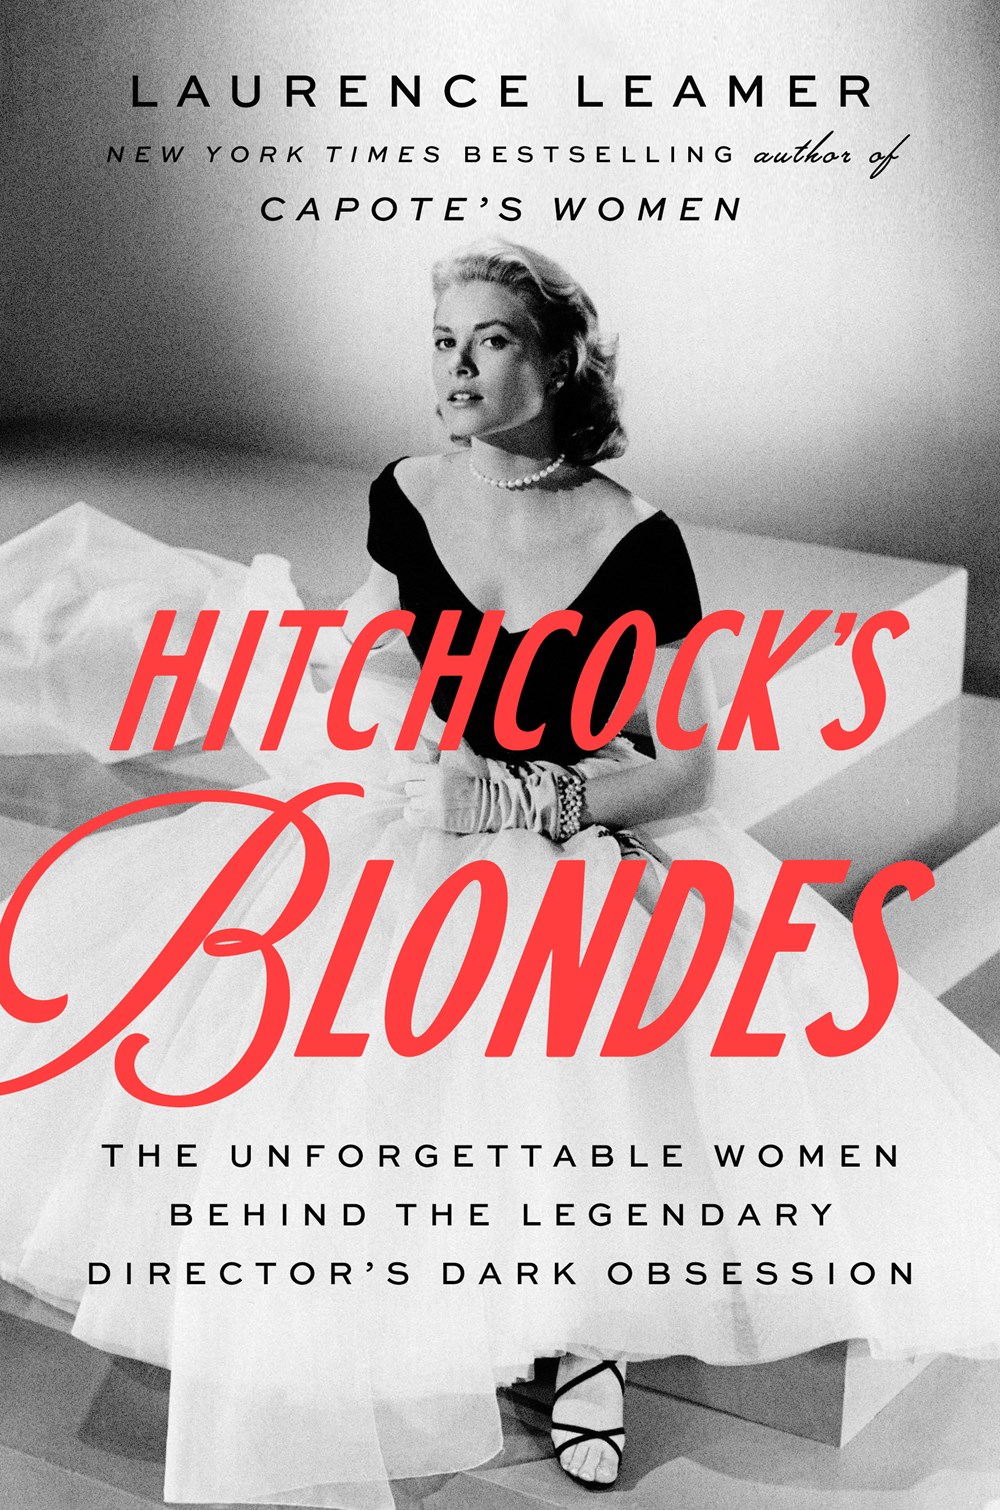 Hitchcock’s Blondes: The Unforgettable Women Behind the Legendary Director’s Dark Obsession